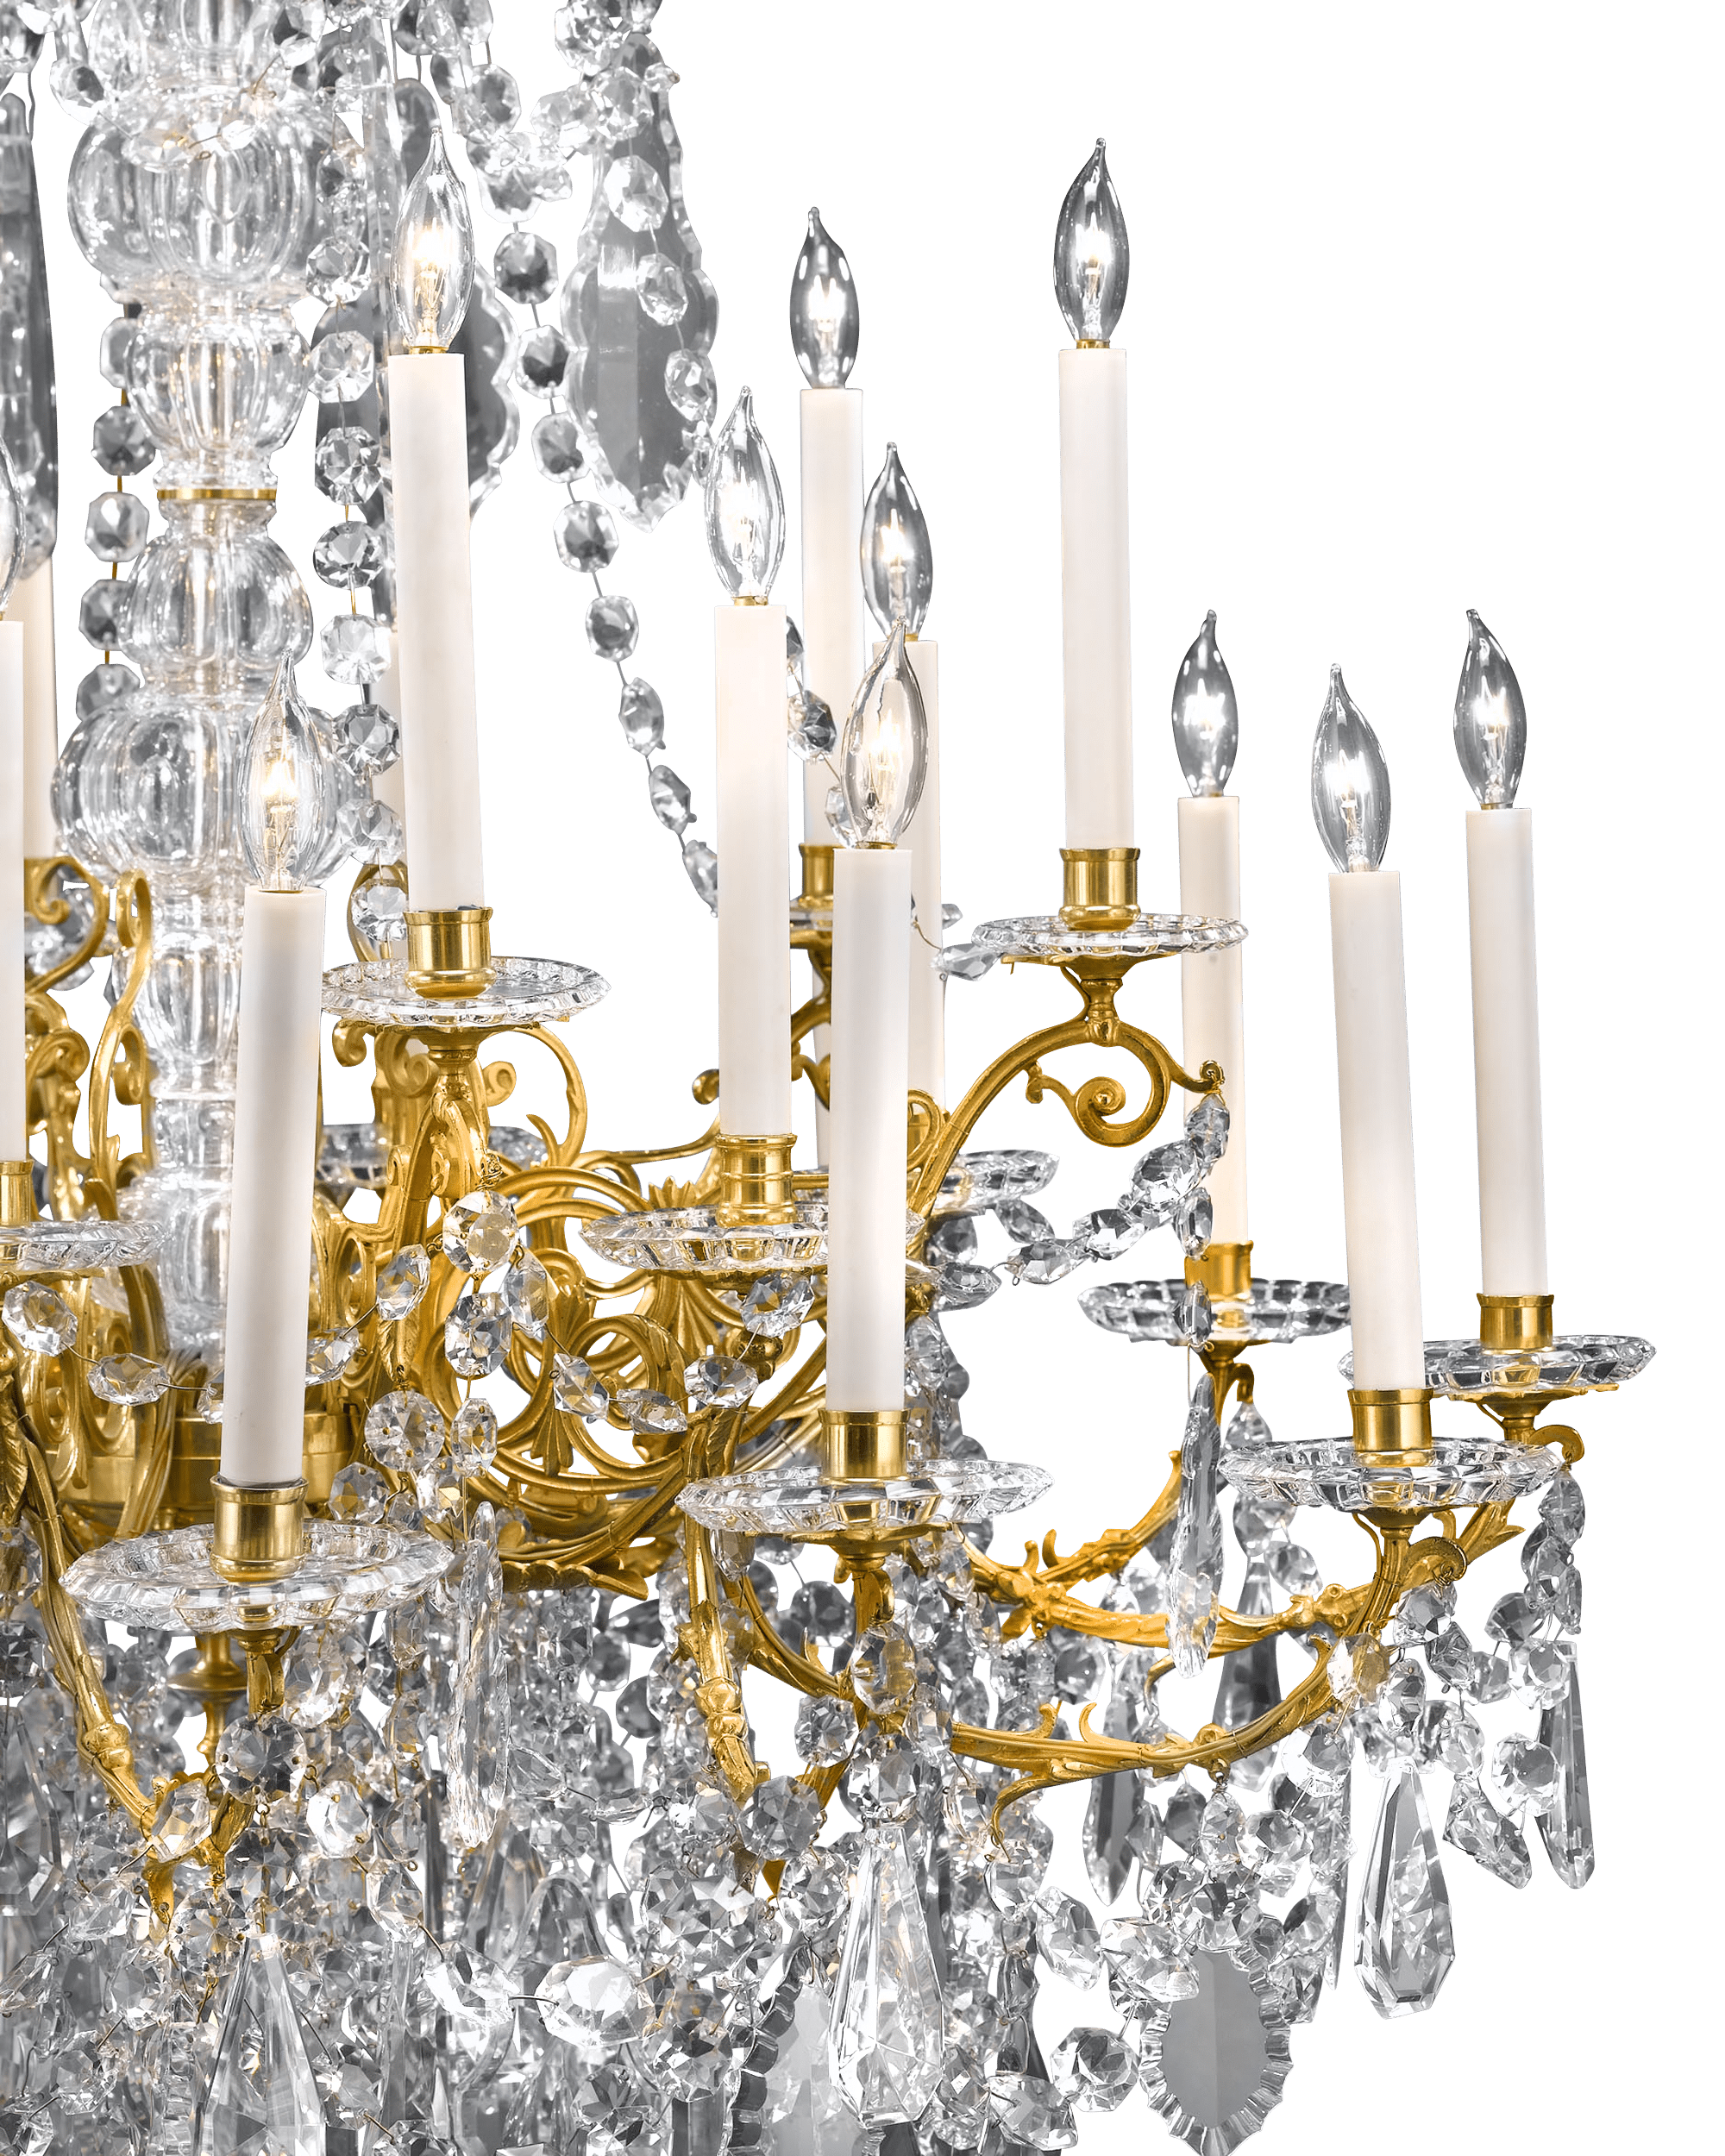 This outstanding chandelier has been restored for electricity